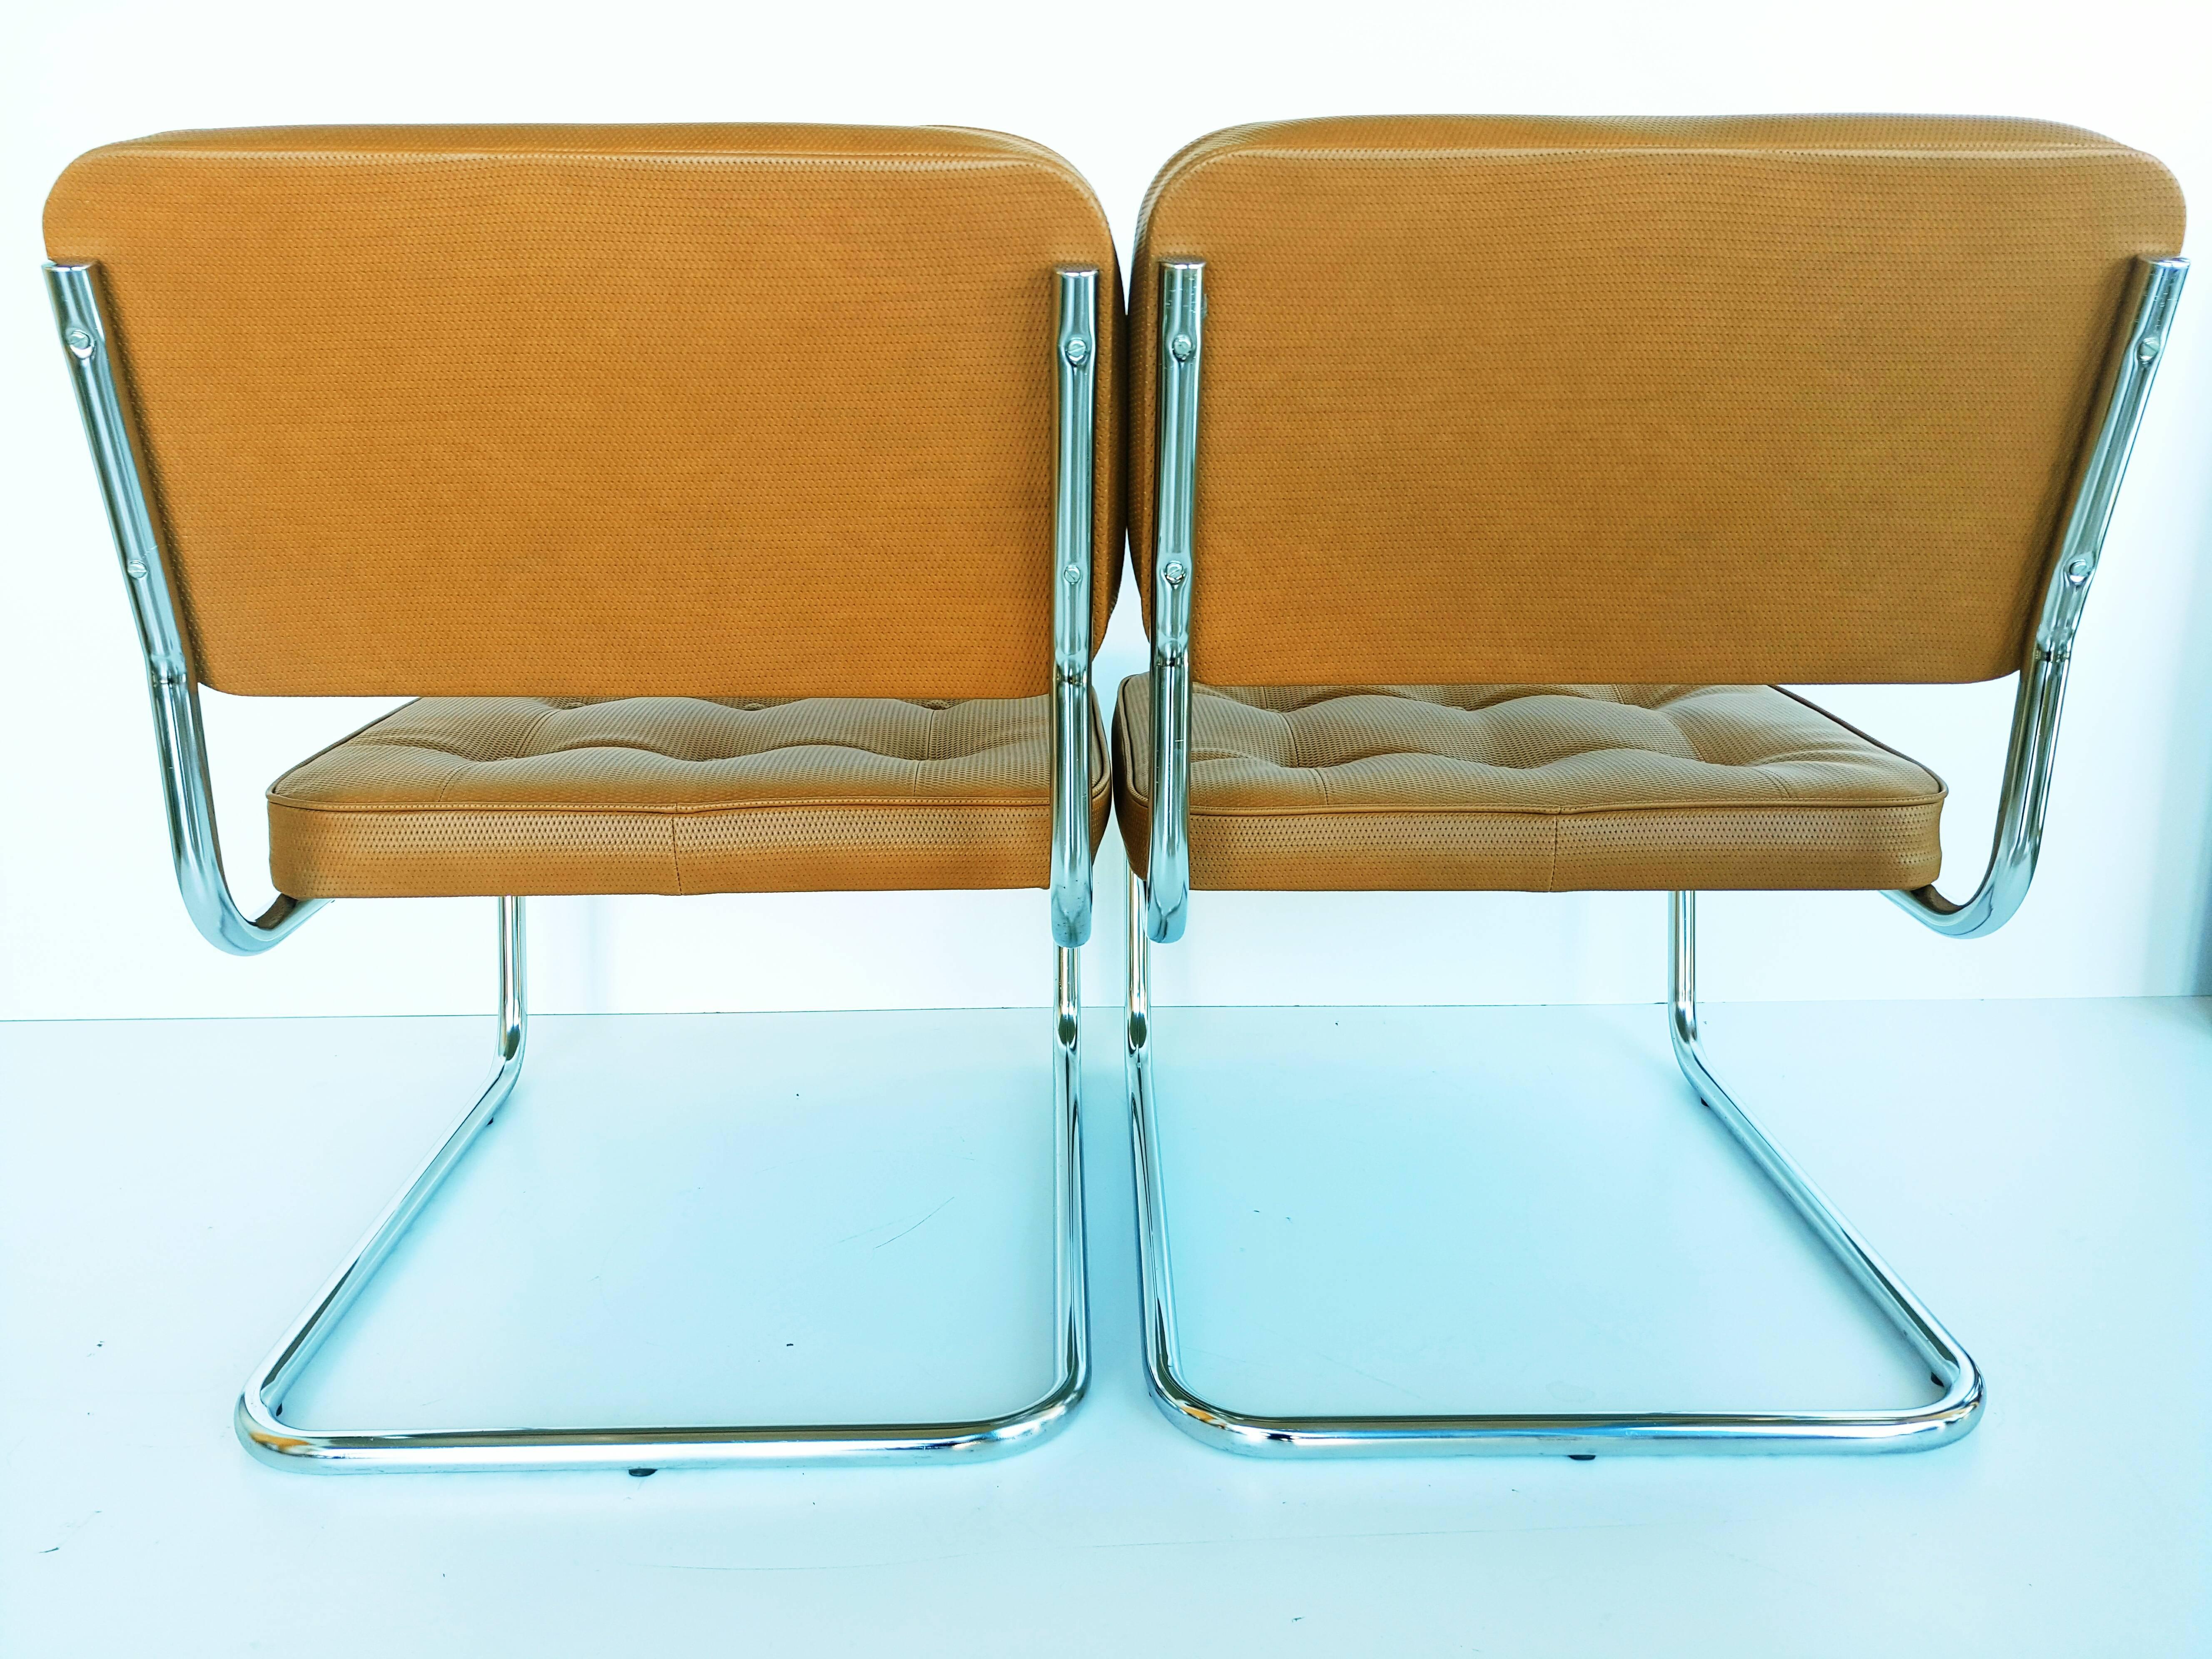 Pair of Tan Mb-Tex Lounge Chairs, circa 1970 For Sale 1